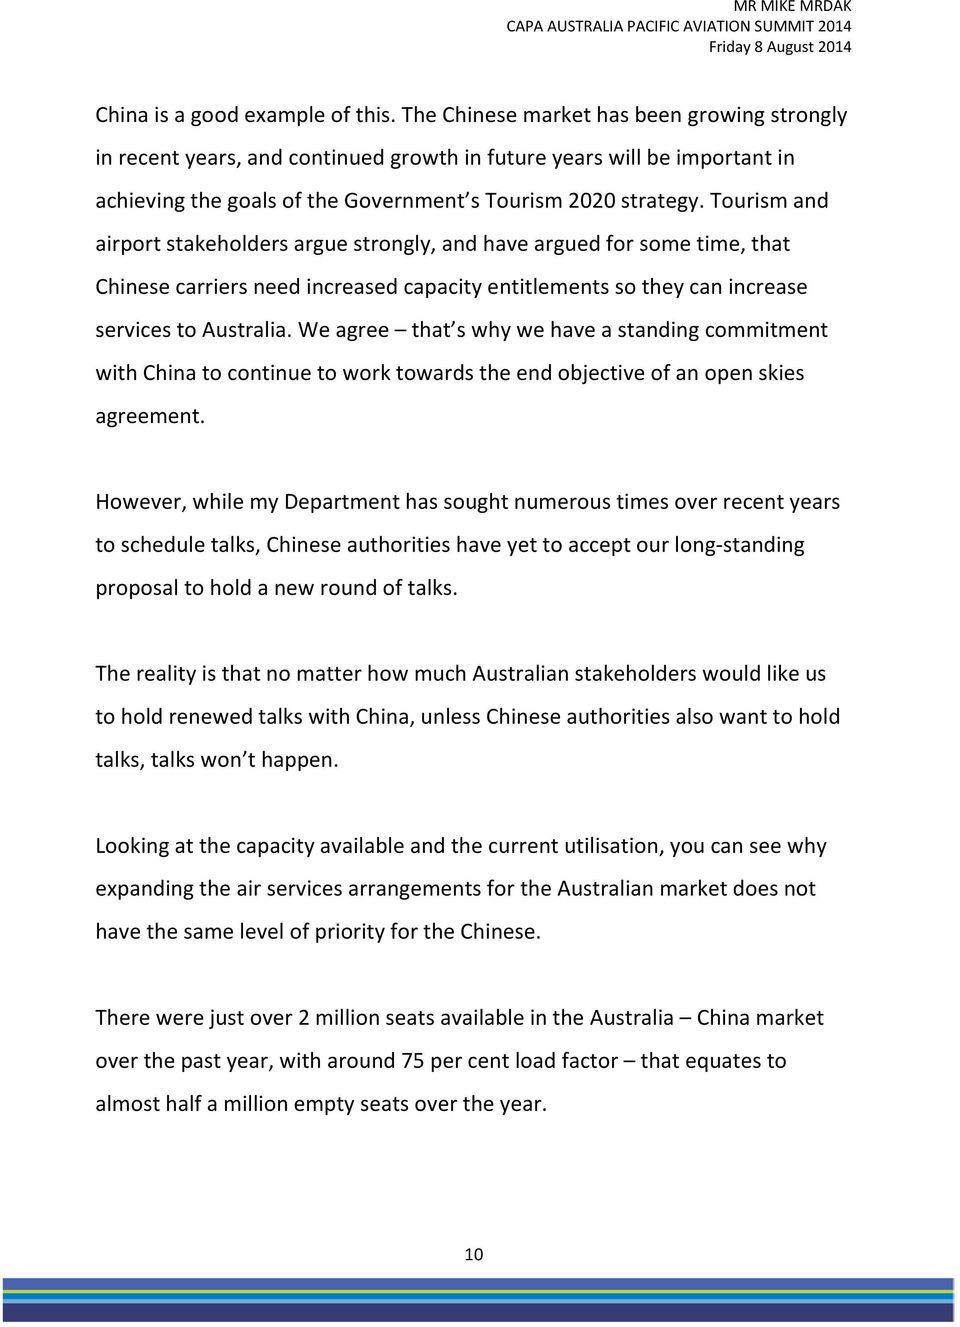 Tourism and airport stakeholders argue strongly, and have argued for some time, that Chinese carriers need increased capacity entitlements so they can increase services to Australia.